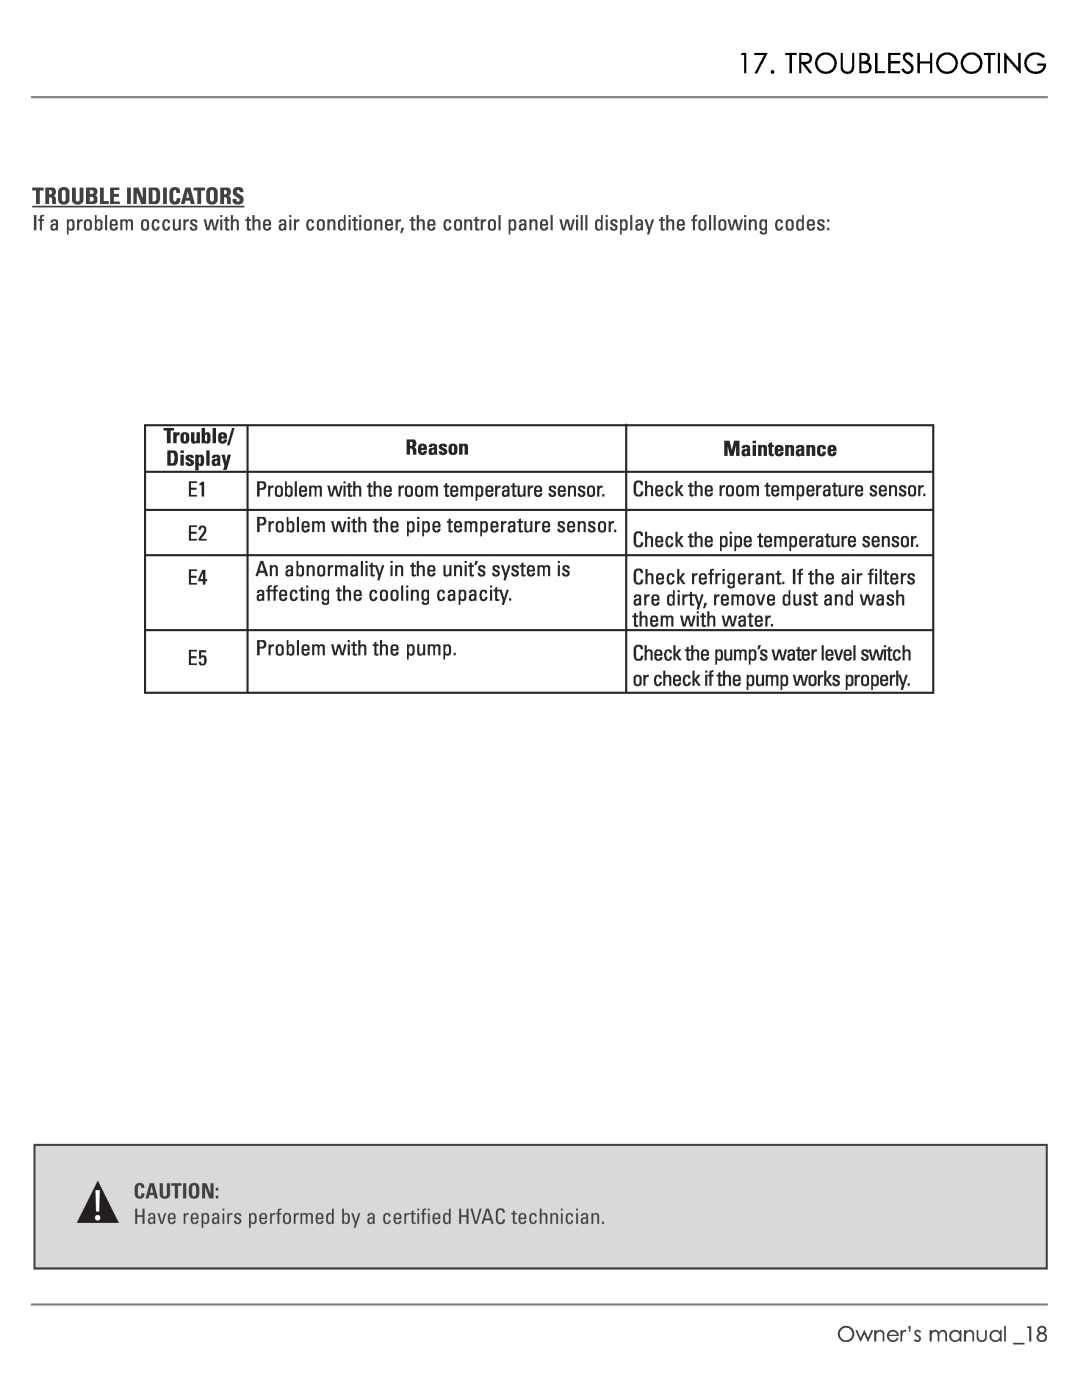 Williams M00045-V01 Owner’s manual _18, Troubleshooting, Trouble Indicators, Reason, Maintenance, them with water 